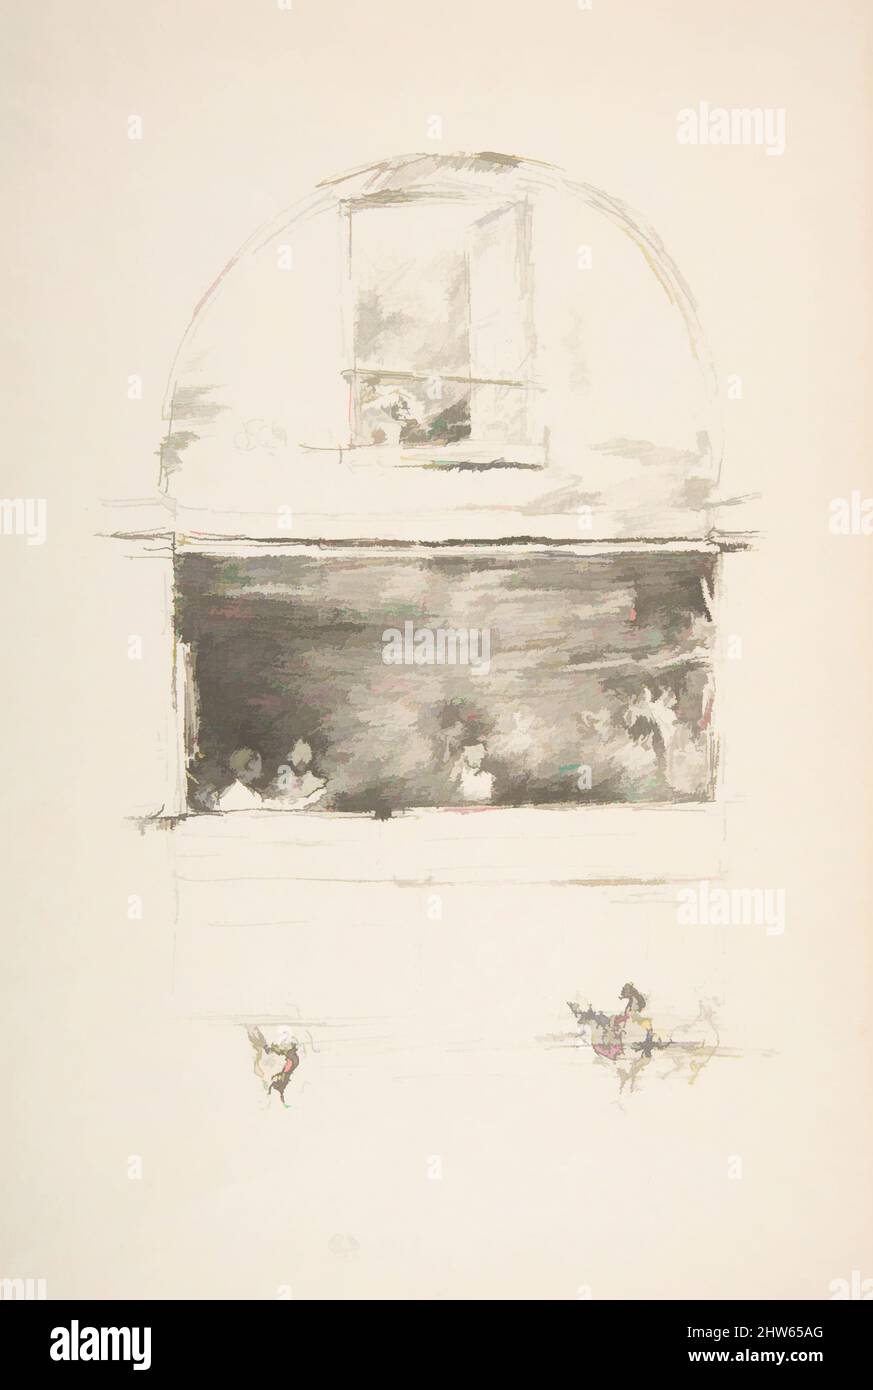 Art inspired by The Forge–Passage du Dragon, 1894, Transfer lithograph with stumping, drawn on thin transparent transfer paper; first state of four (Chicago); printed in black ink on medium weight ivory laid paper, sheet: 12 11/16 x 8 3/16 in. (32.2 x 20.8 cm), Prints, James McNeill, Classic works modernized by Artotop with a splash of modernity. Shapes, color and value, eye-catching visual impact on art. Emotions through freedom of artworks in a contemporary way. A timeless message pursuing a wildly creative new direction. Artists turning to the digital medium and creating the Artotop NFT Stock Photo